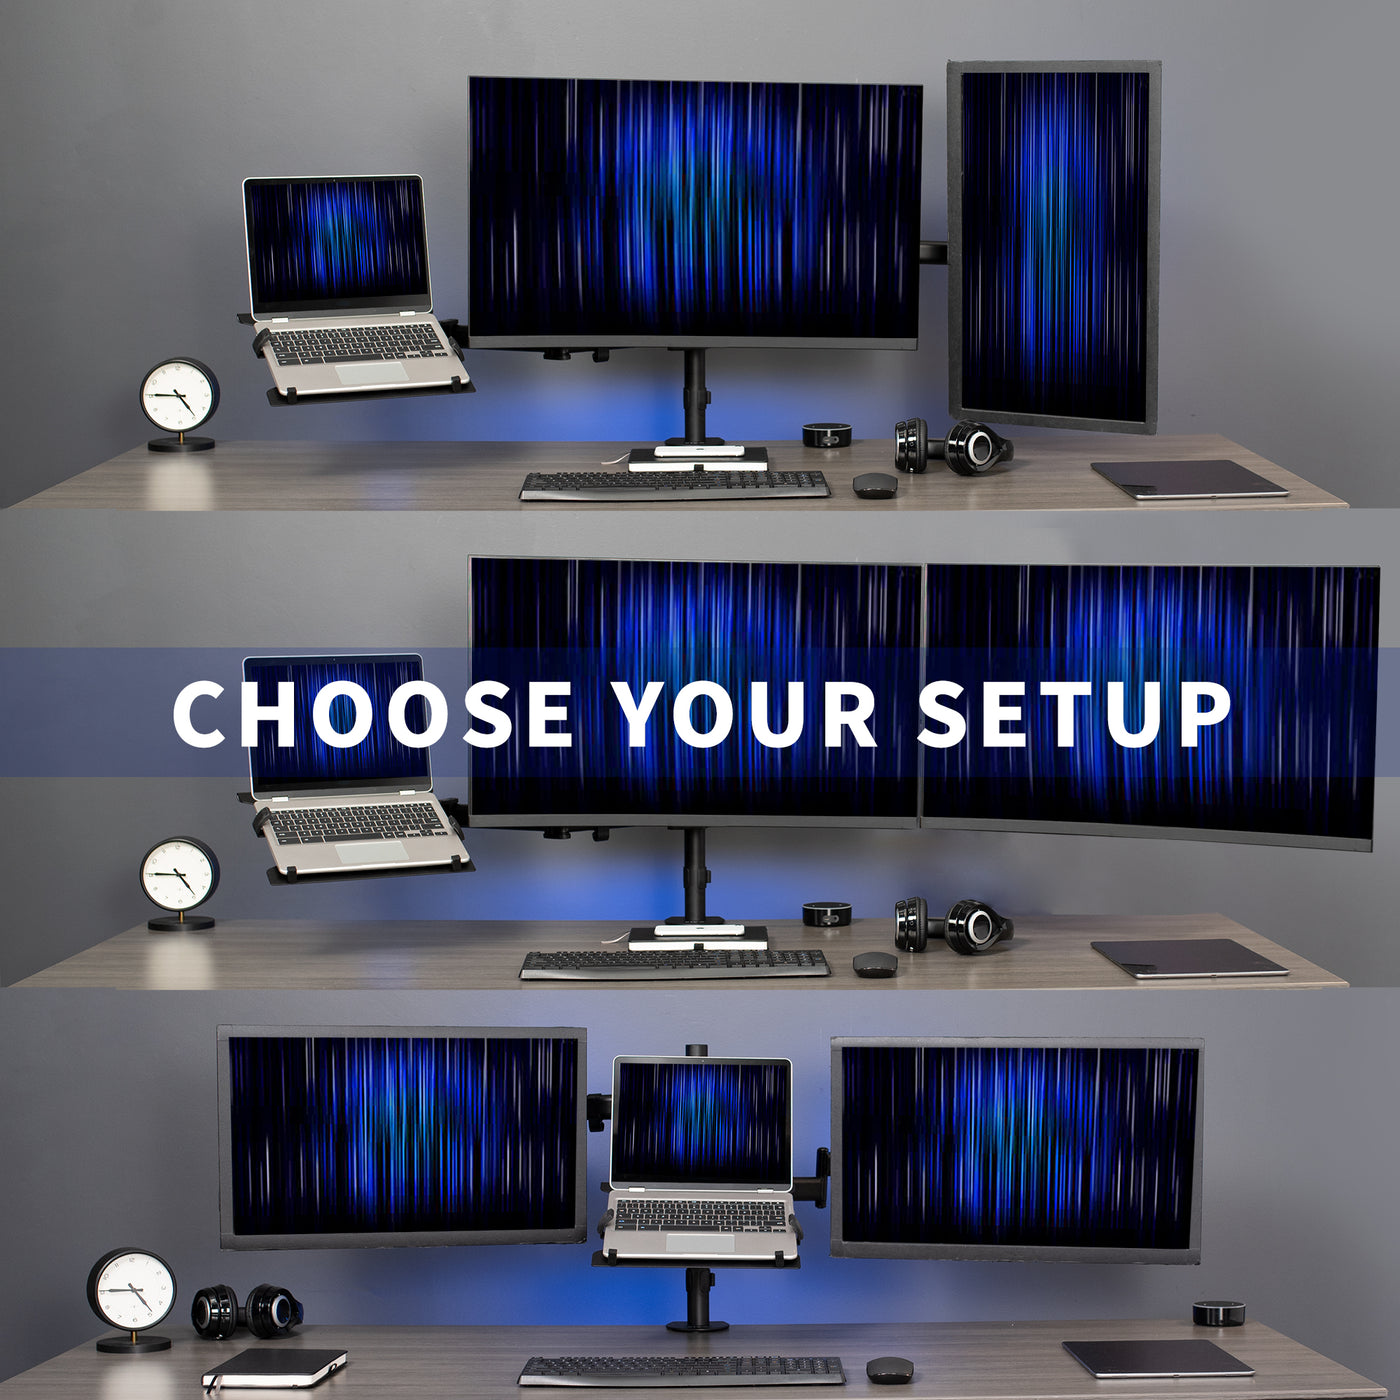 Monitor Arm vs Stand: Which is Best for Your Setup?